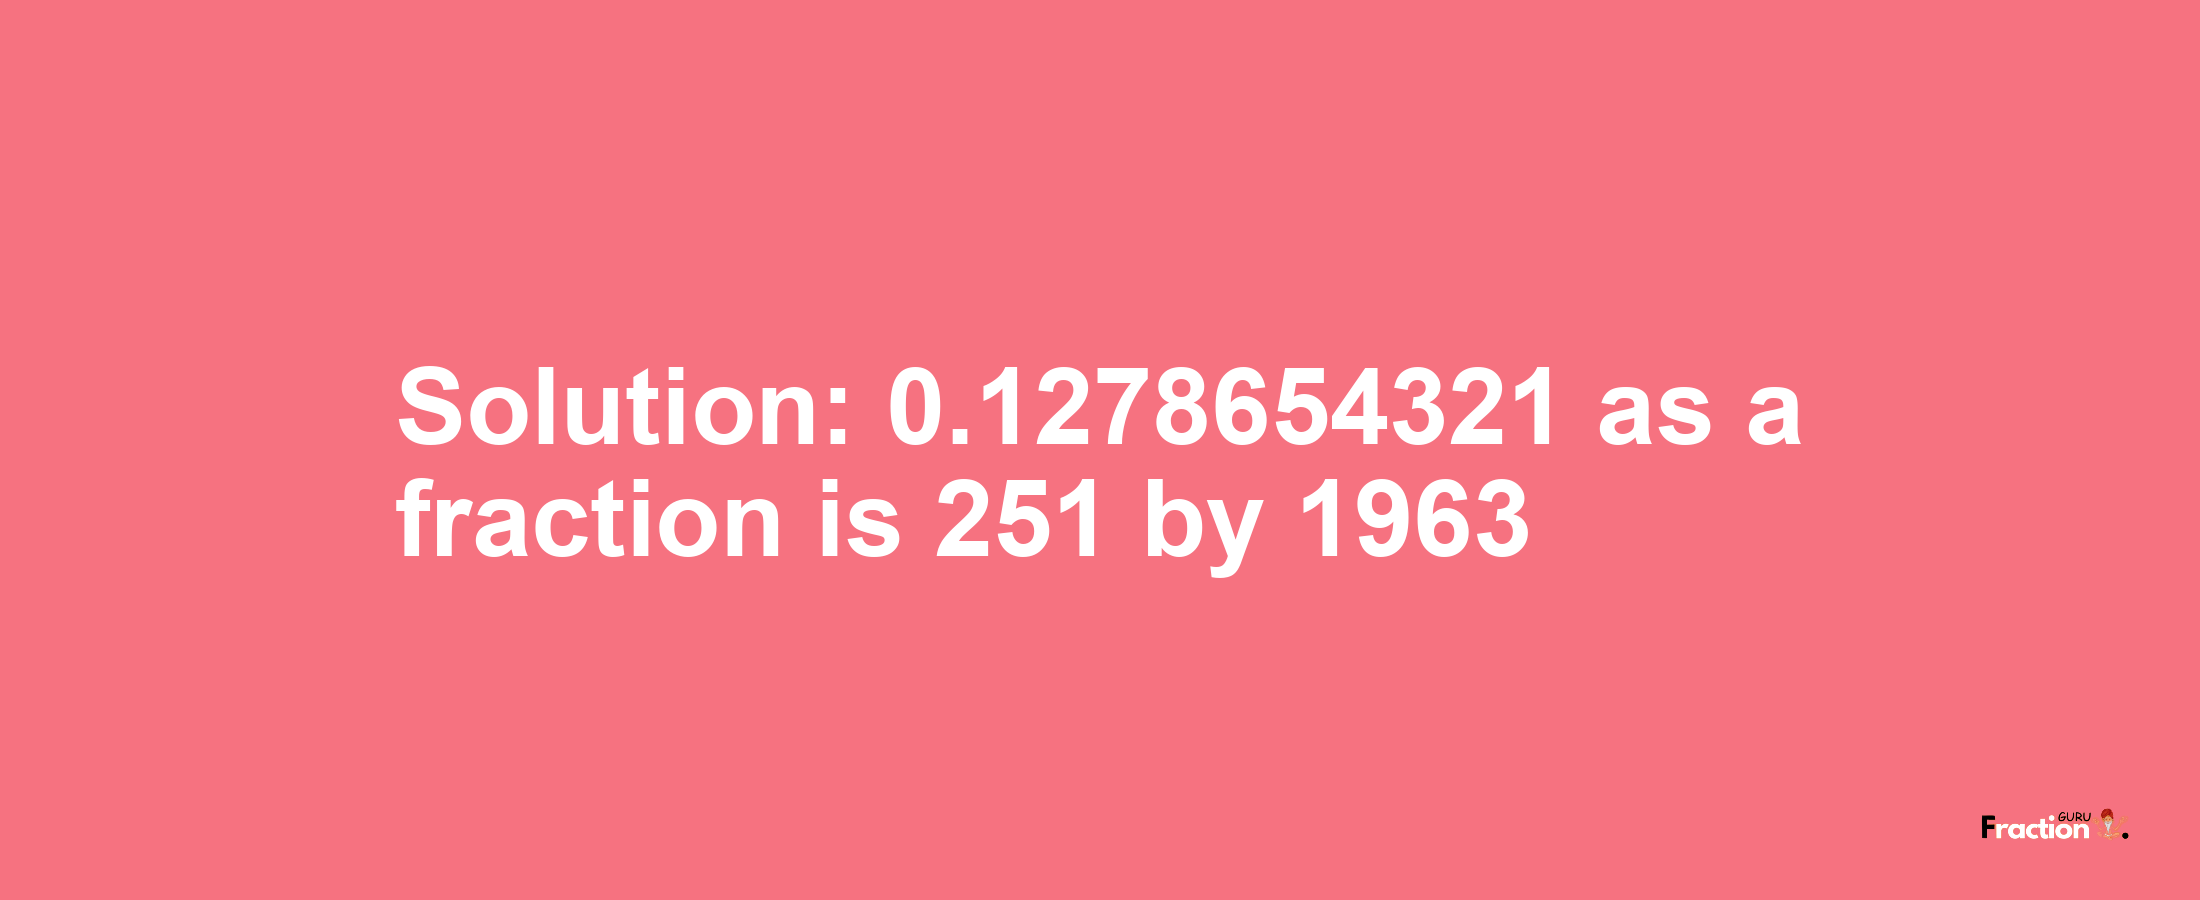 Solution:0.1278654321 as a fraction is 251/1963